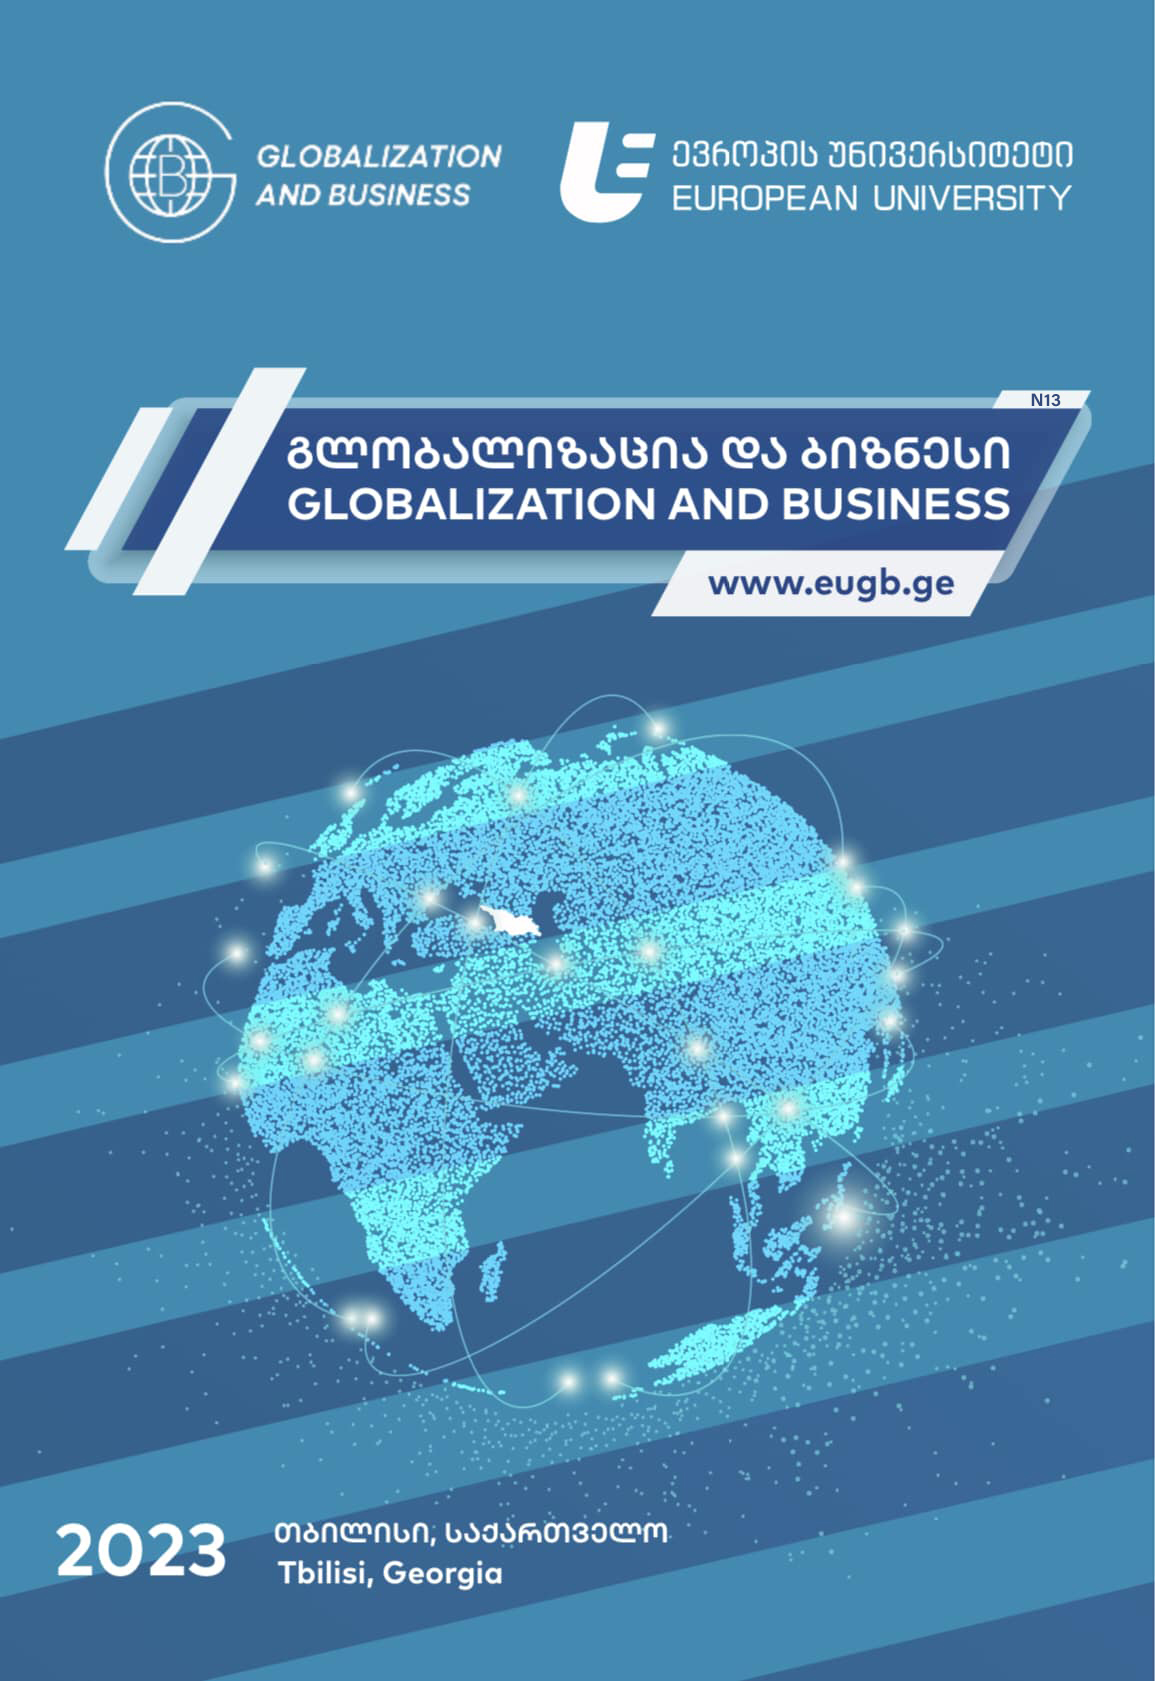 					View Vol. 7 No. 13 (2022): Globalization and Business
				